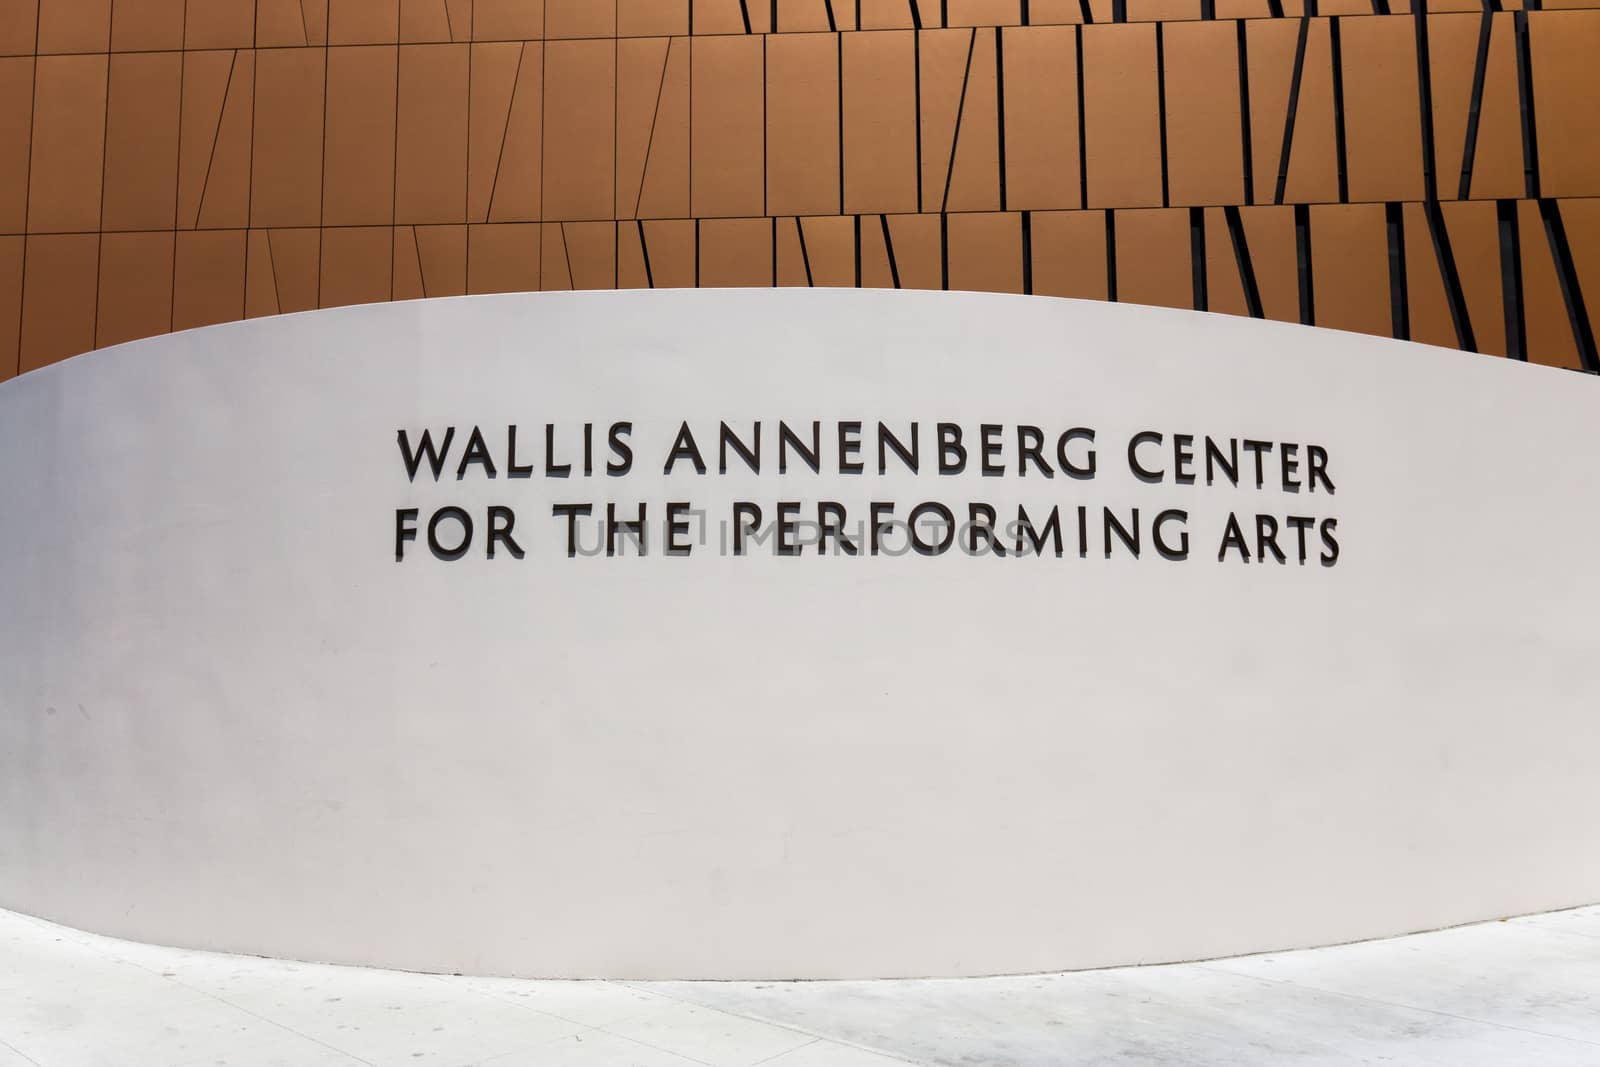 BEVERLY HILLS, CA/USA - MAY 10, 2015: The Wallis Annenberg Center for the Performing Arts. The Annenberg Center is a community arts center in Beverly Hills.